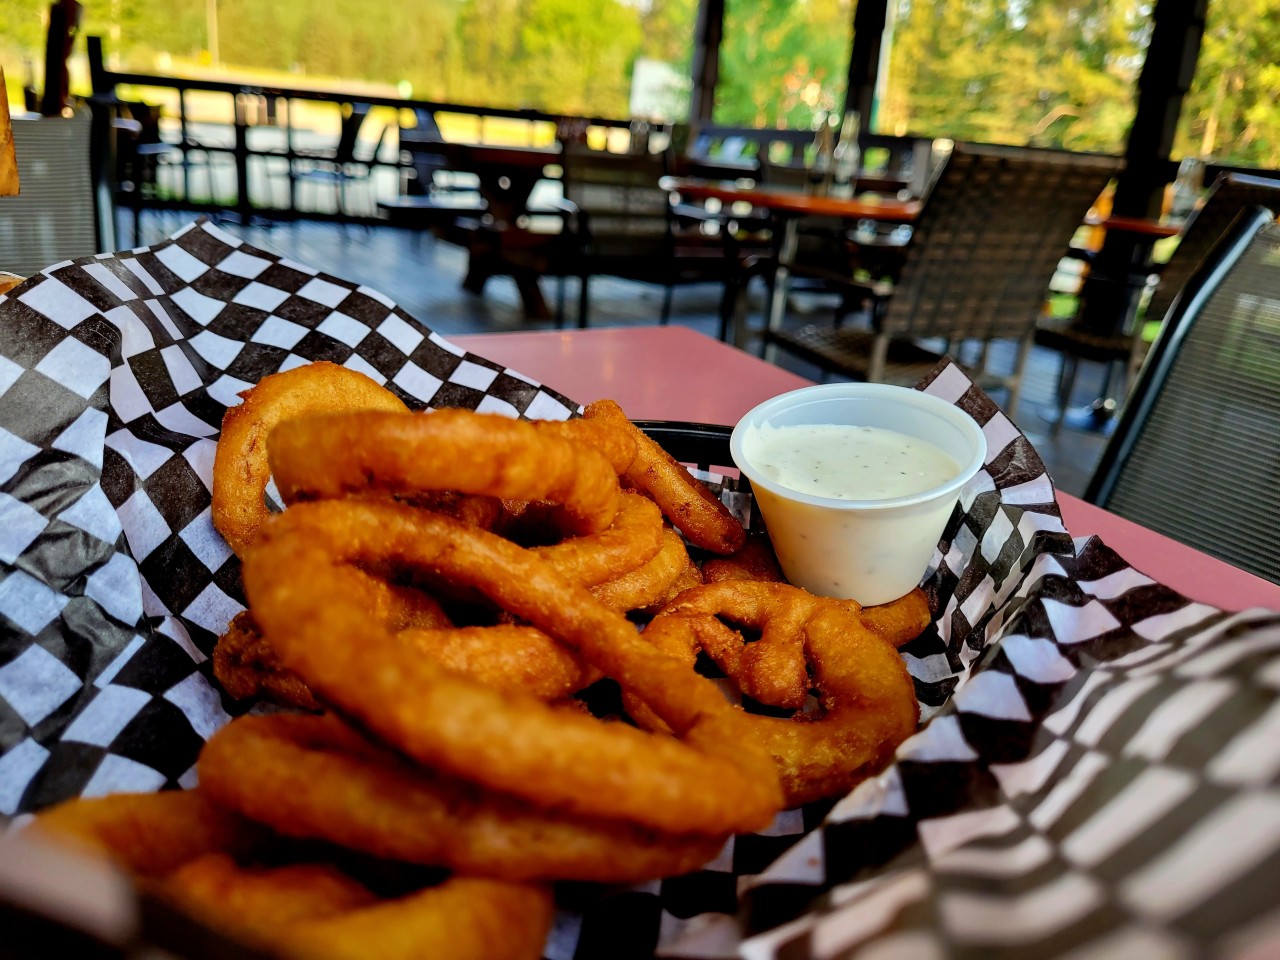 Onion Rings at The Bearberry Saloon - Sundre Alberta - Perfectly crisp and yummy Onion Rings at the Bearberry Saloon, Sundre, Alberta, Canada.